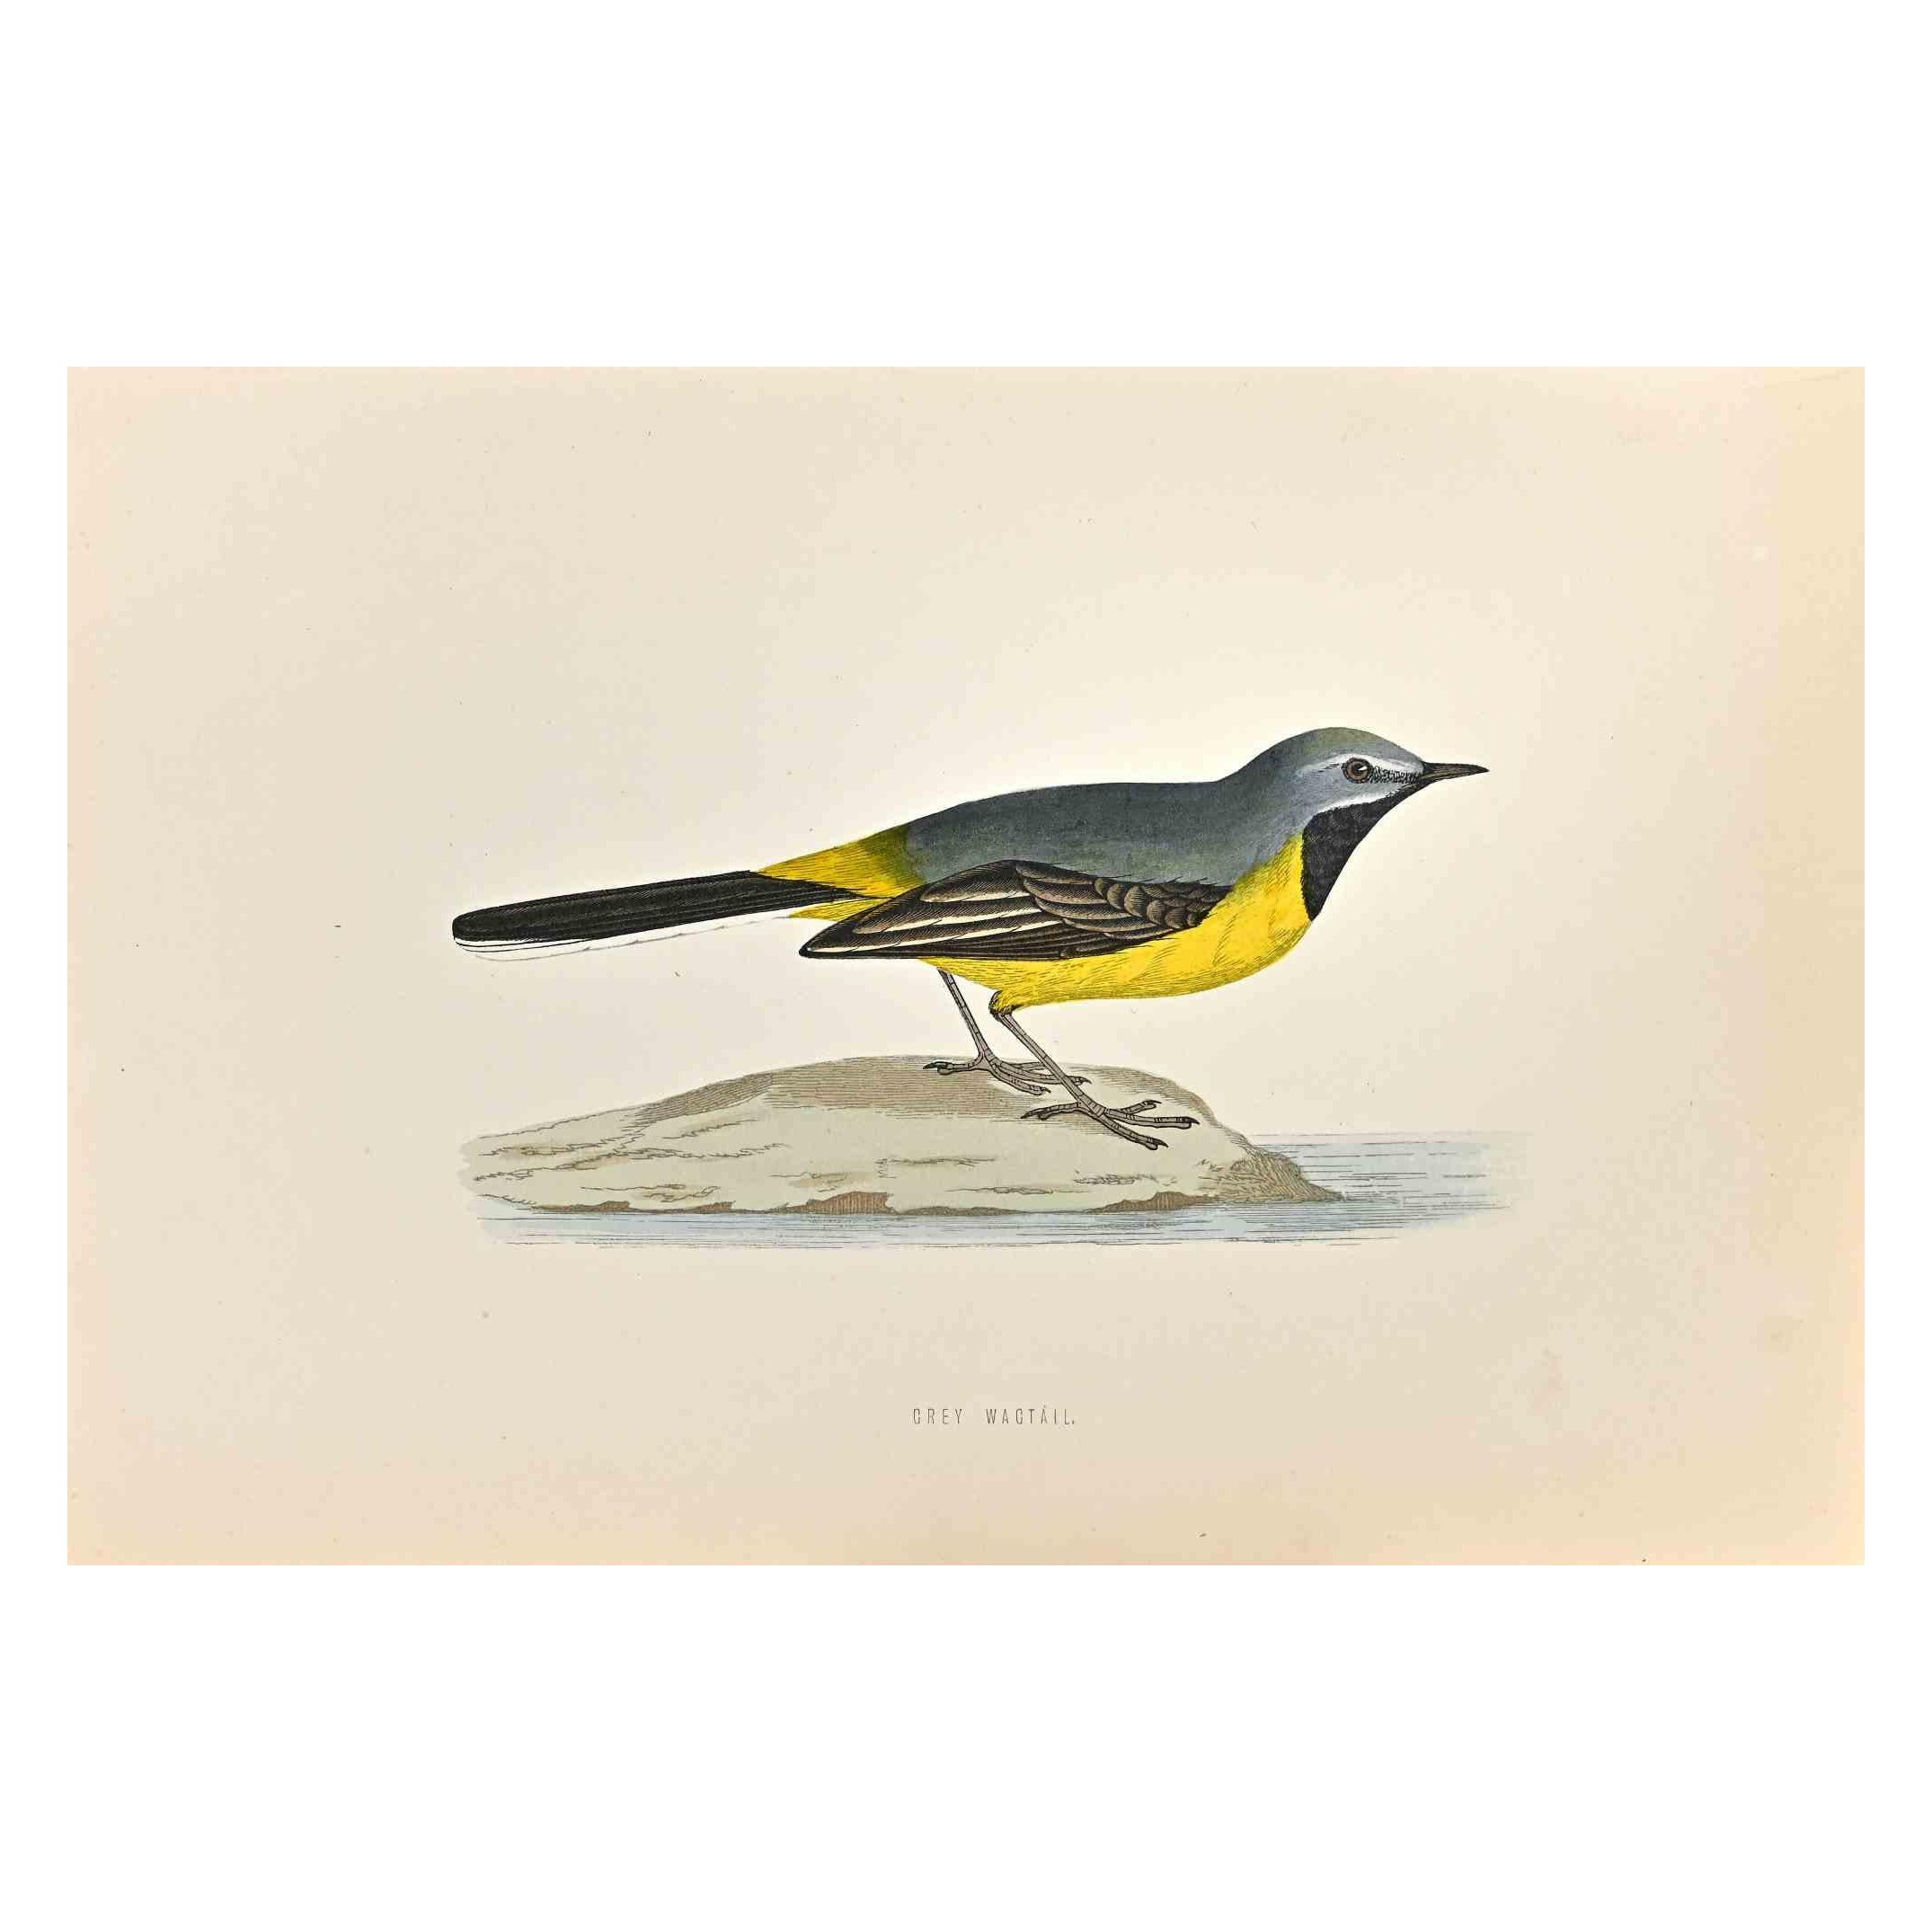 Grey Wagtail is a modern artwork realized in 1870 by the British artist Alexander Francis Lydon (1836-1917).

Woodcut print on ivory-colored paper.

Hand-colored, published by London, Bell & Sons, 1870.  

The name of the bird is printed on the